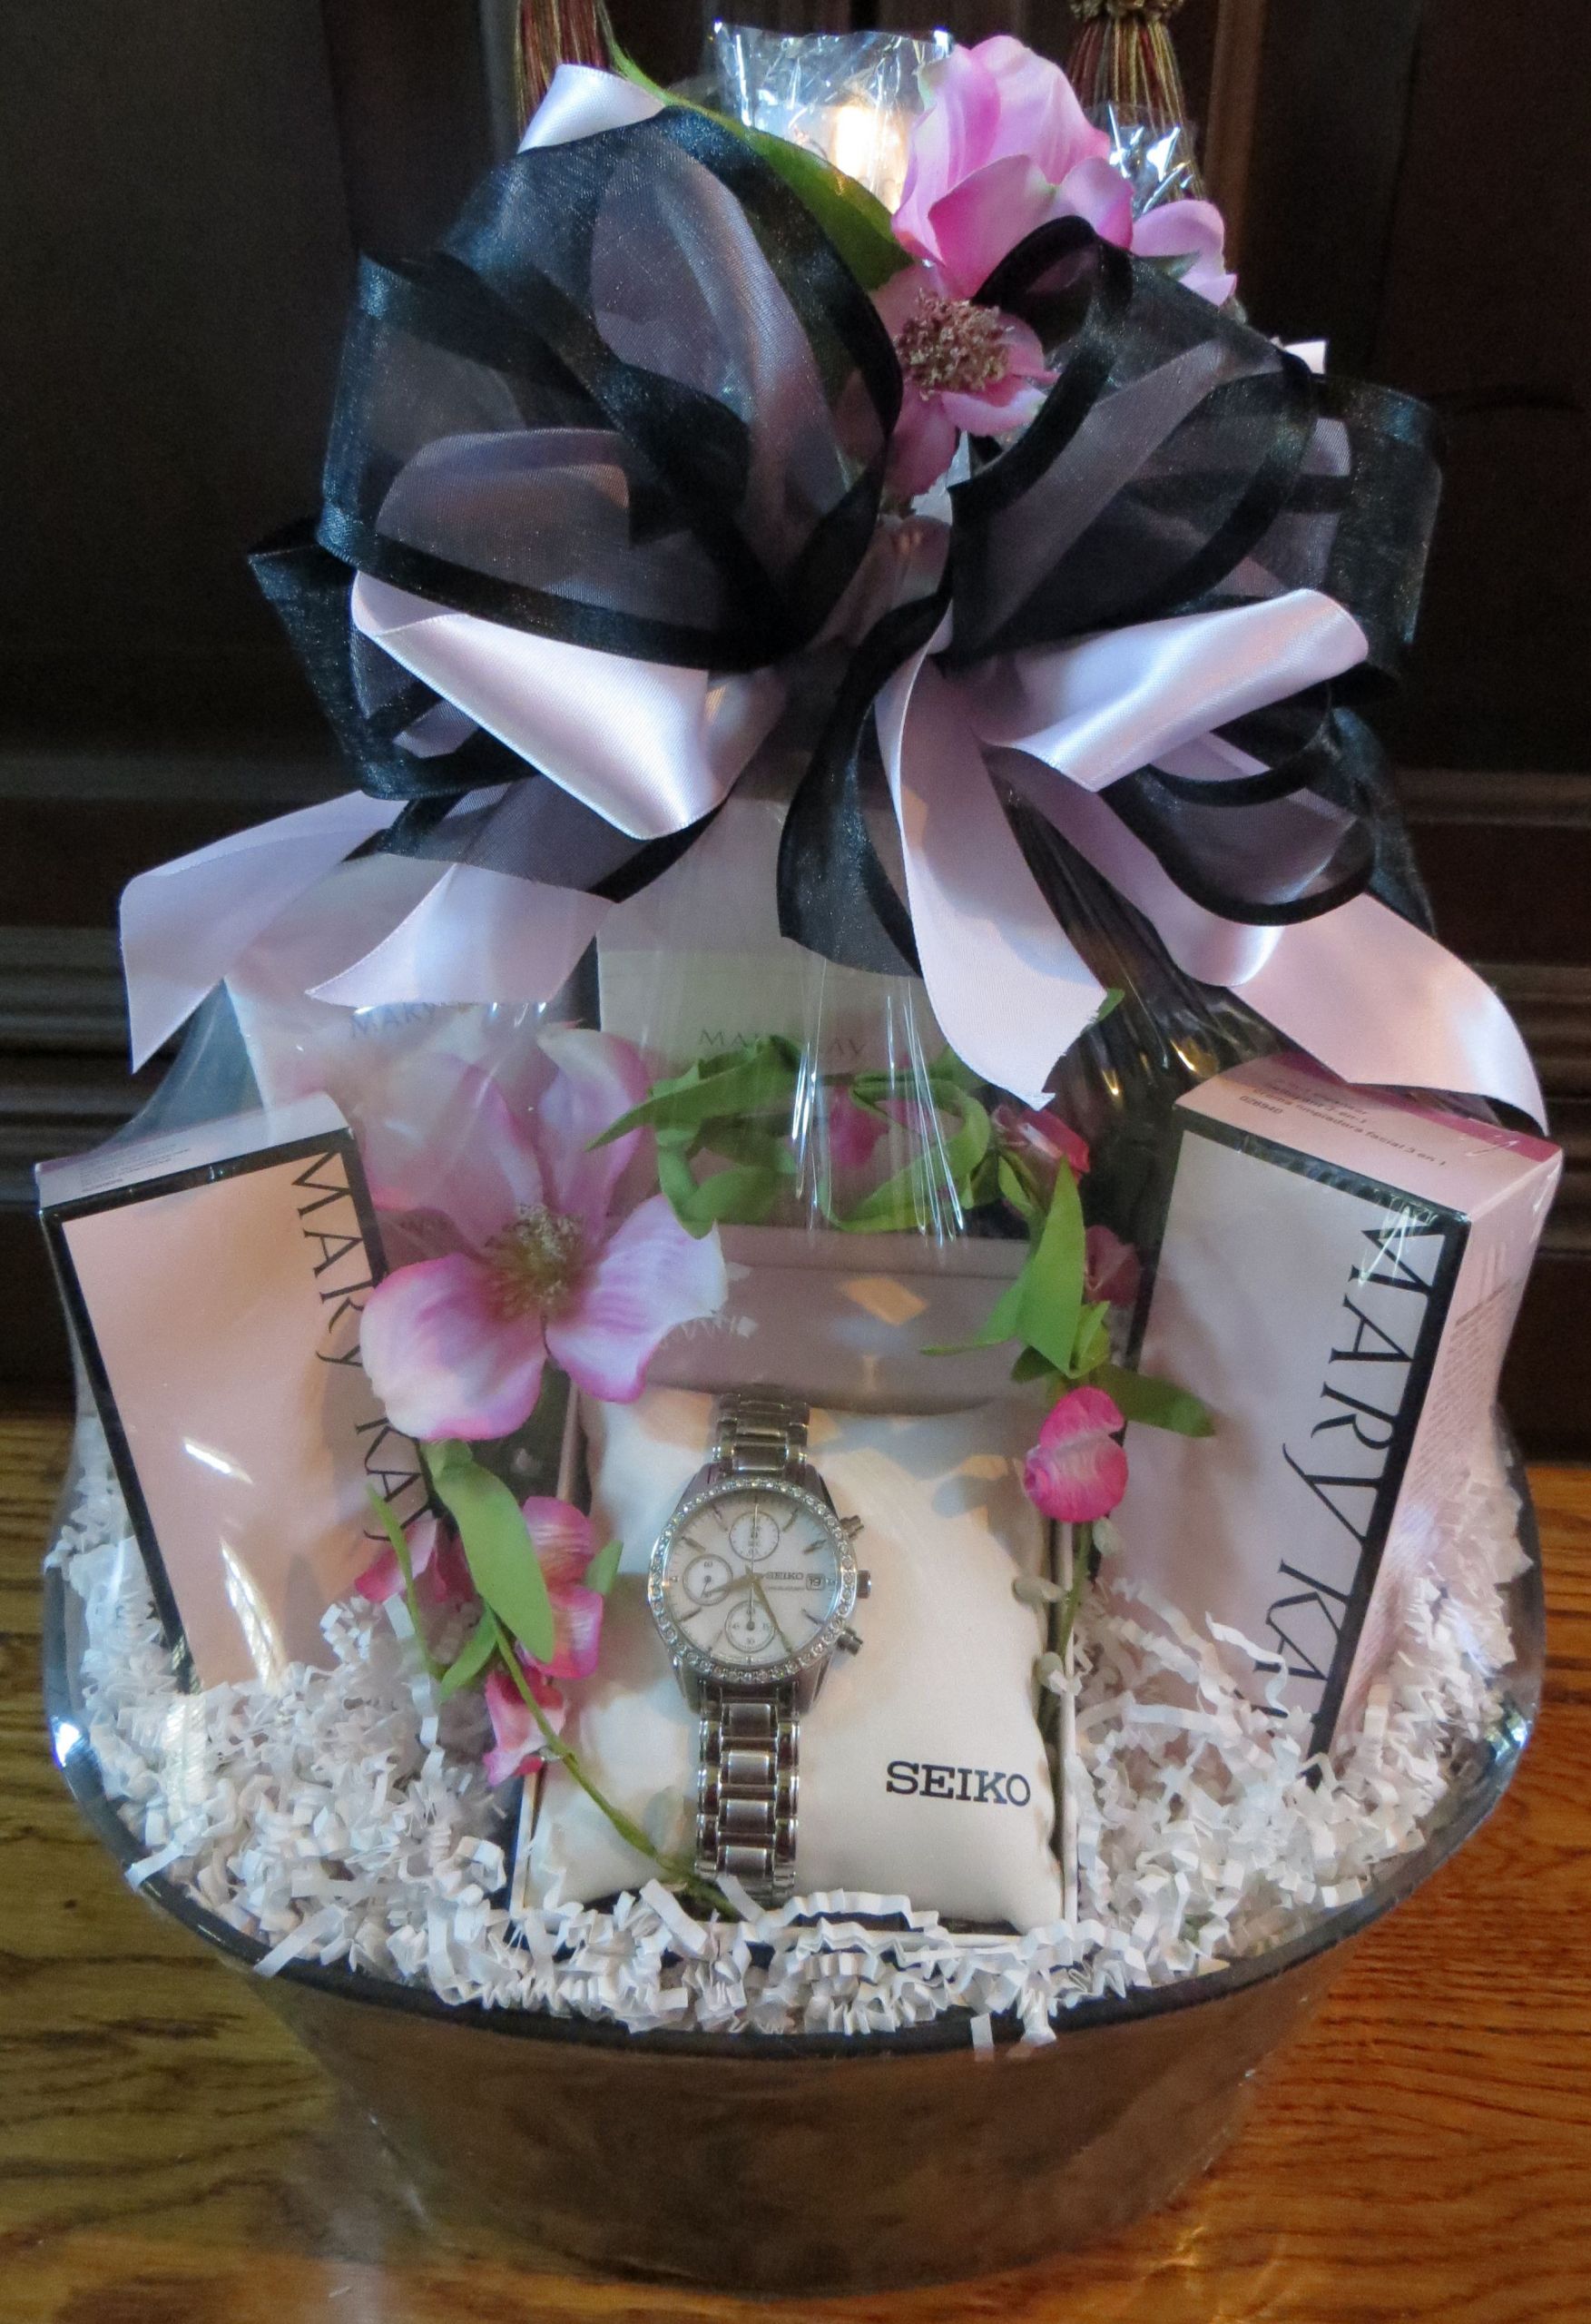 Mary Kay Mother'S Day Gift Ideas
 The Timewise Gift Basket features Mary Kay products and